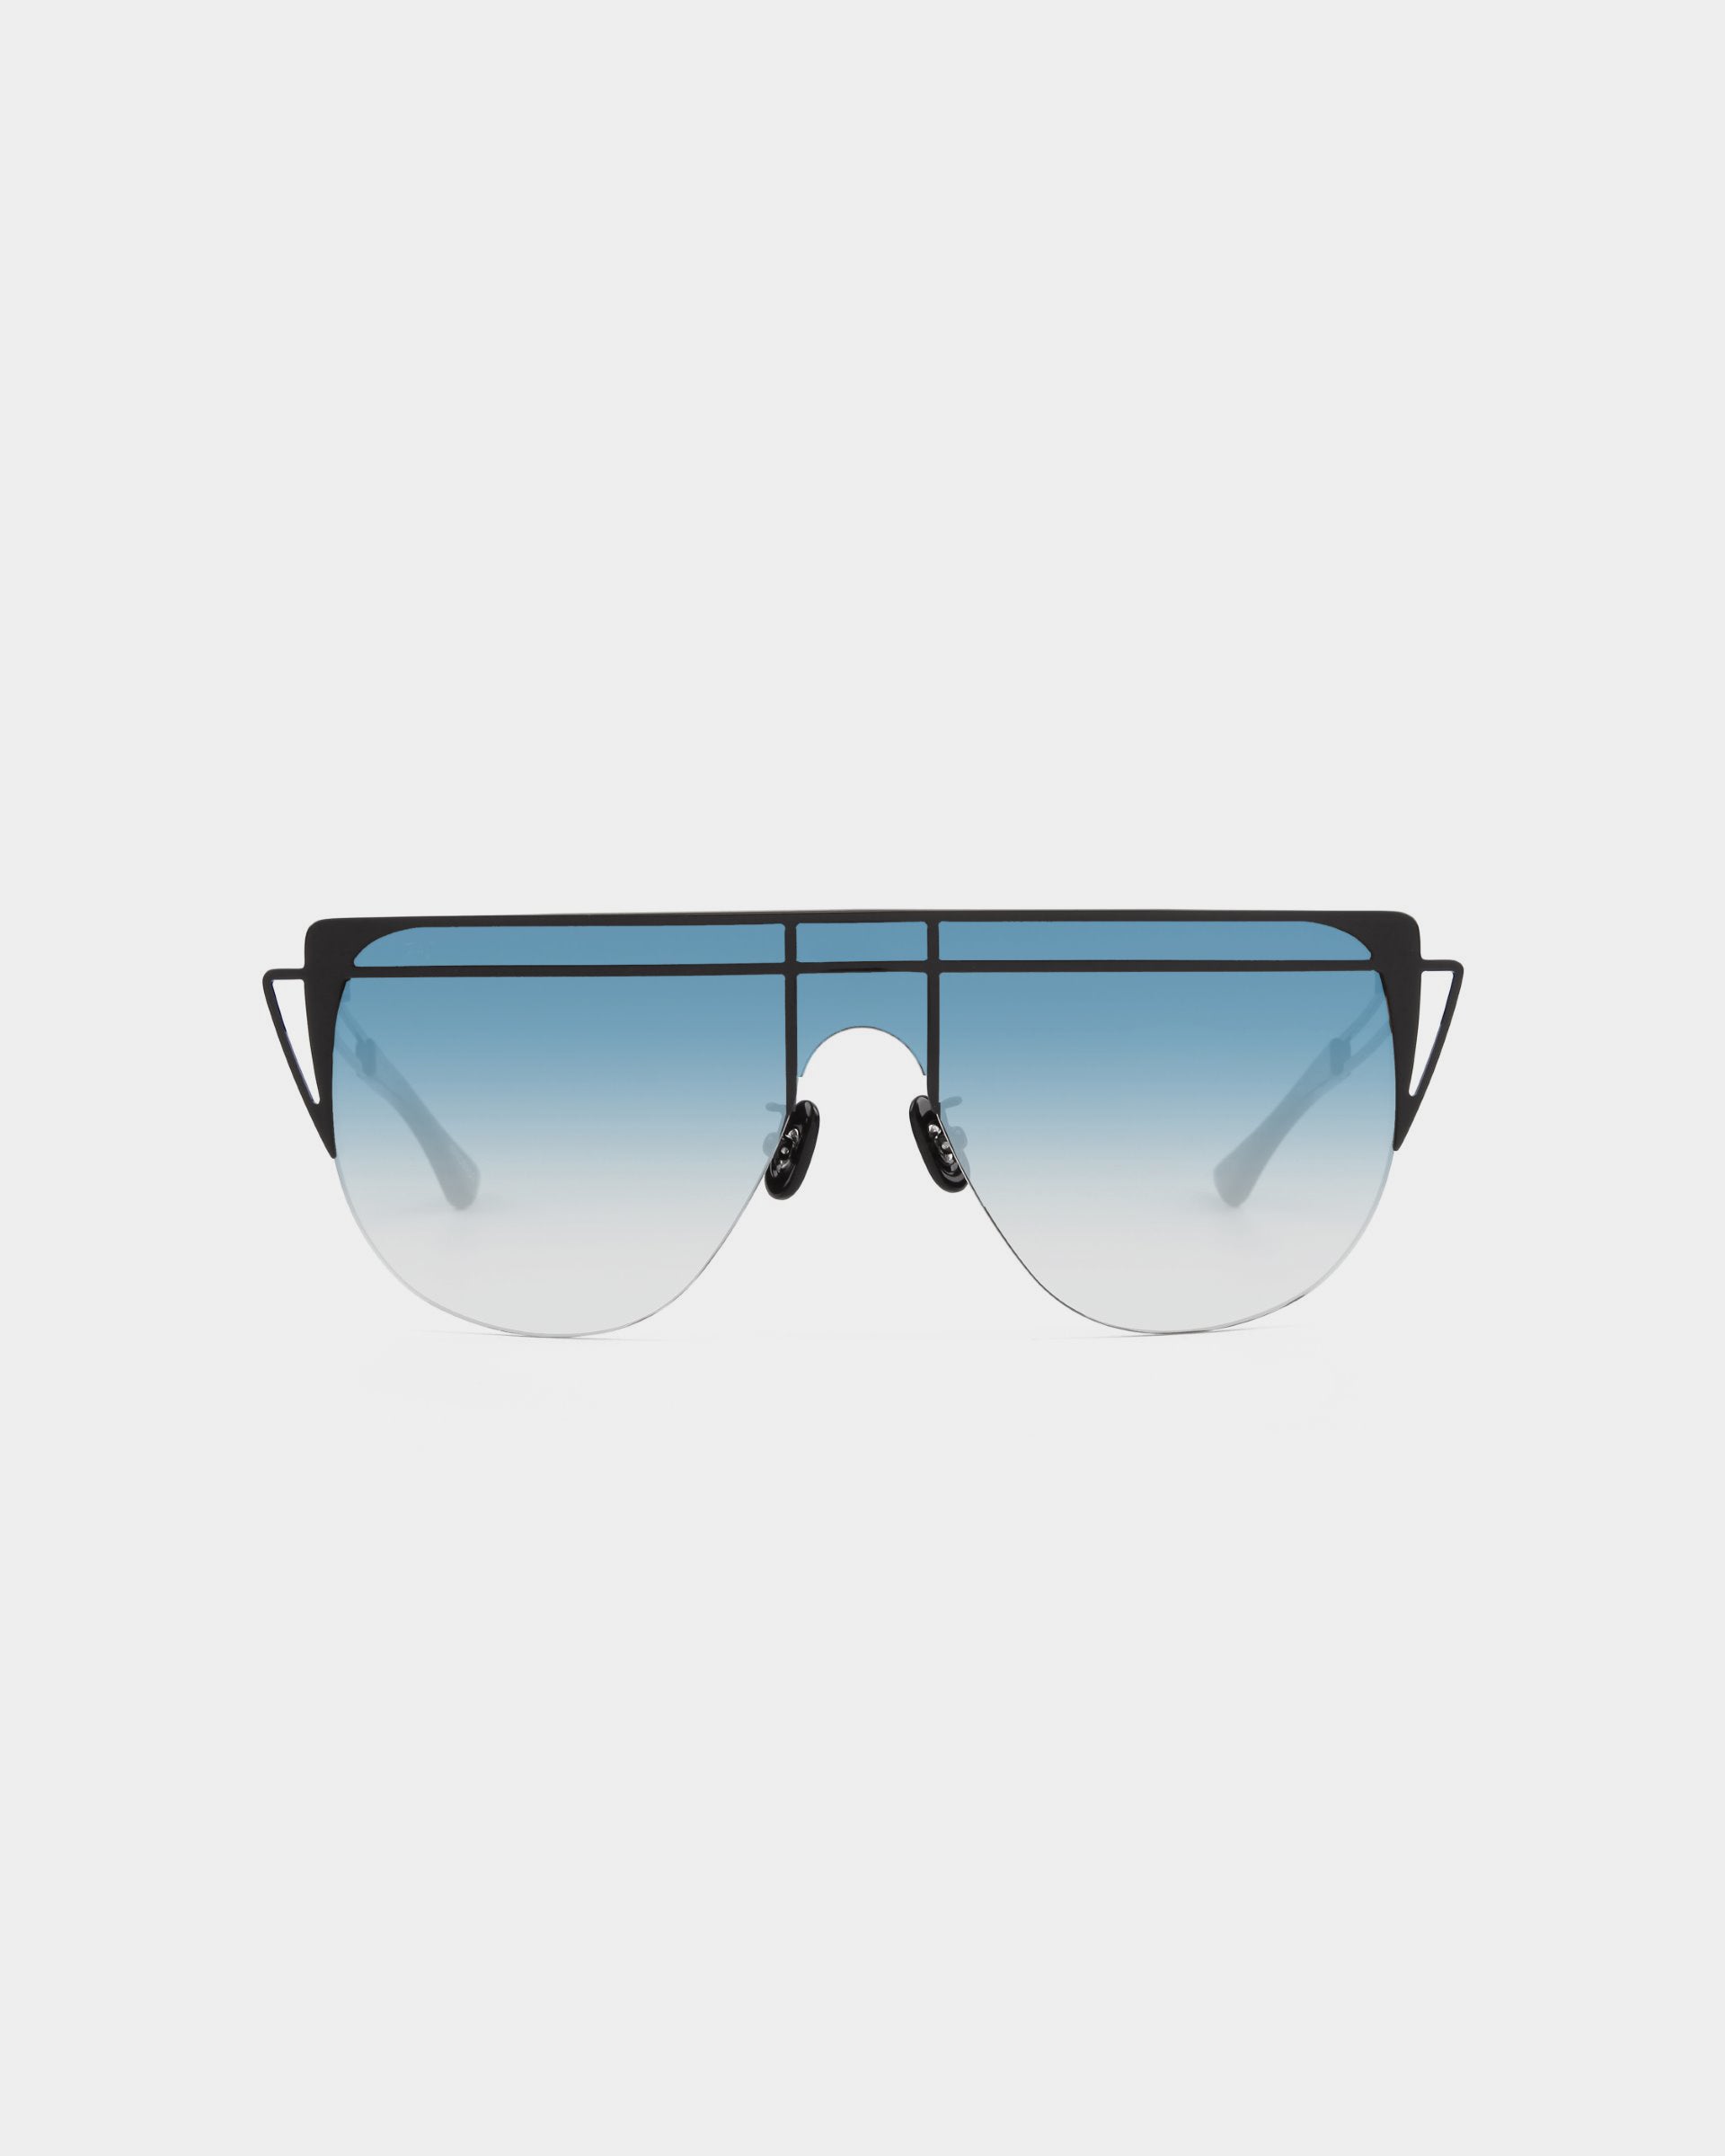 A pair of **Alien** sunglasses by **For Art's Sake®** with gradient blue tint lenses and a thin black frame. The design features a straight top bar and minimalist, sleek lines, giving them a modern and trendy appearance. The nose pads are adjustable for a comfortable fit, offering UV protection.